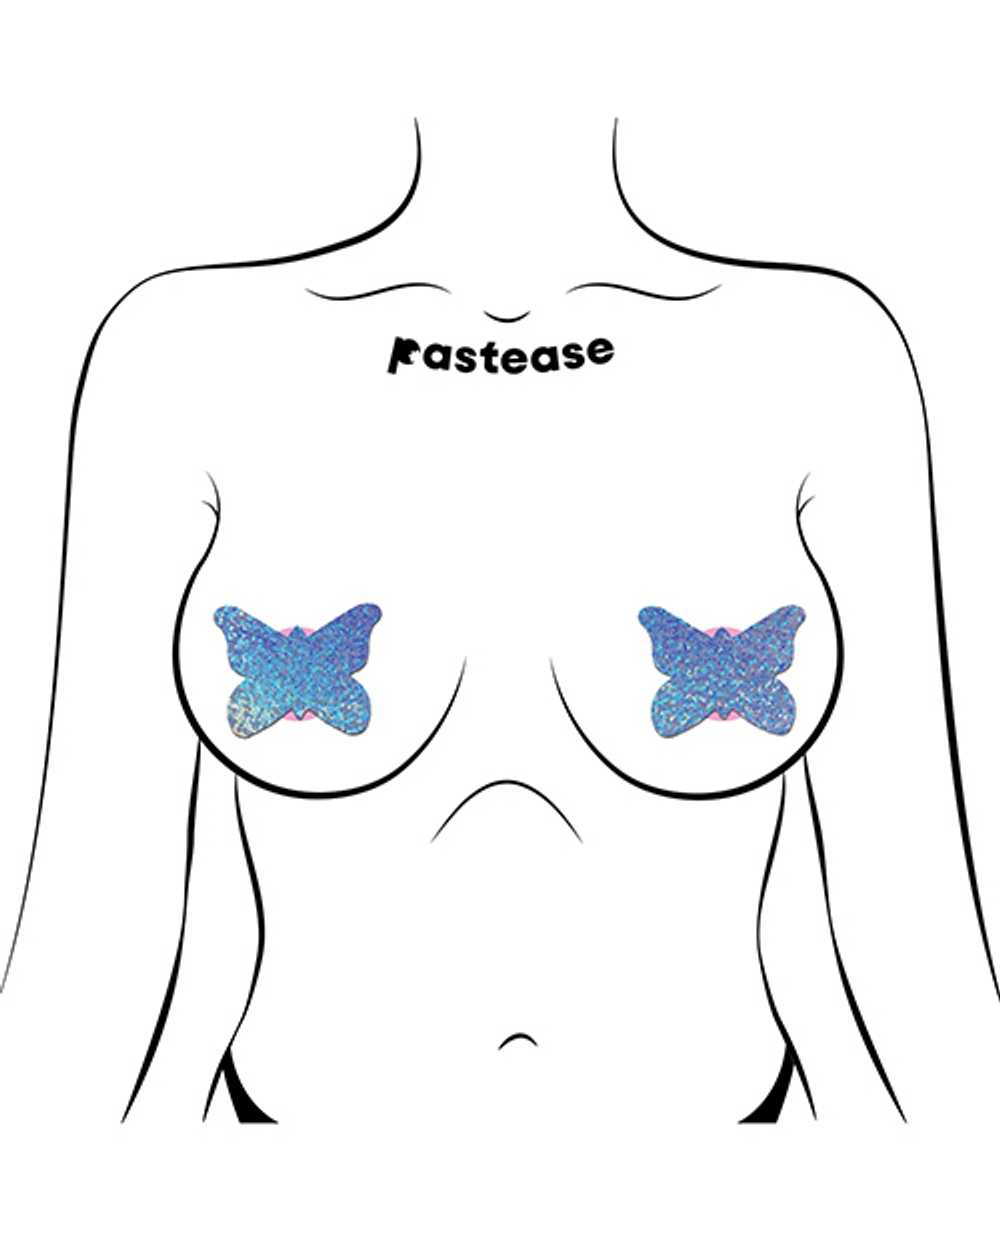 Pastease Premium Glitter Butterfly - O/s - image 3